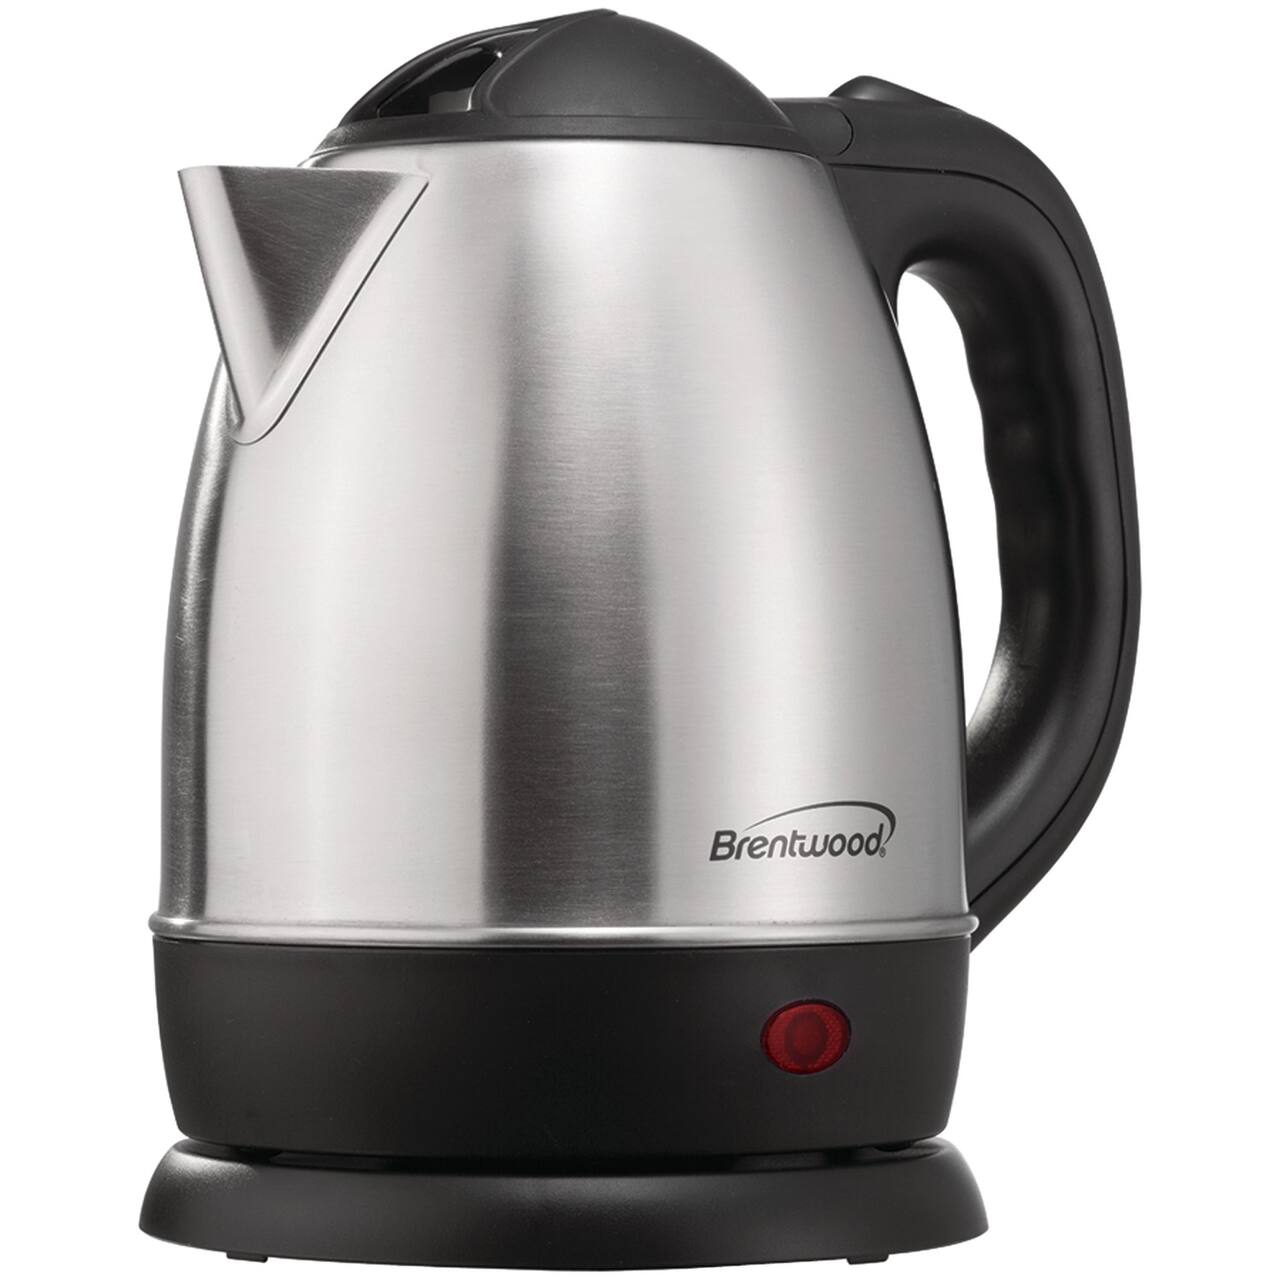 Brentwood 1.2L Stainless Steel Electric Cordless Tea Kettle